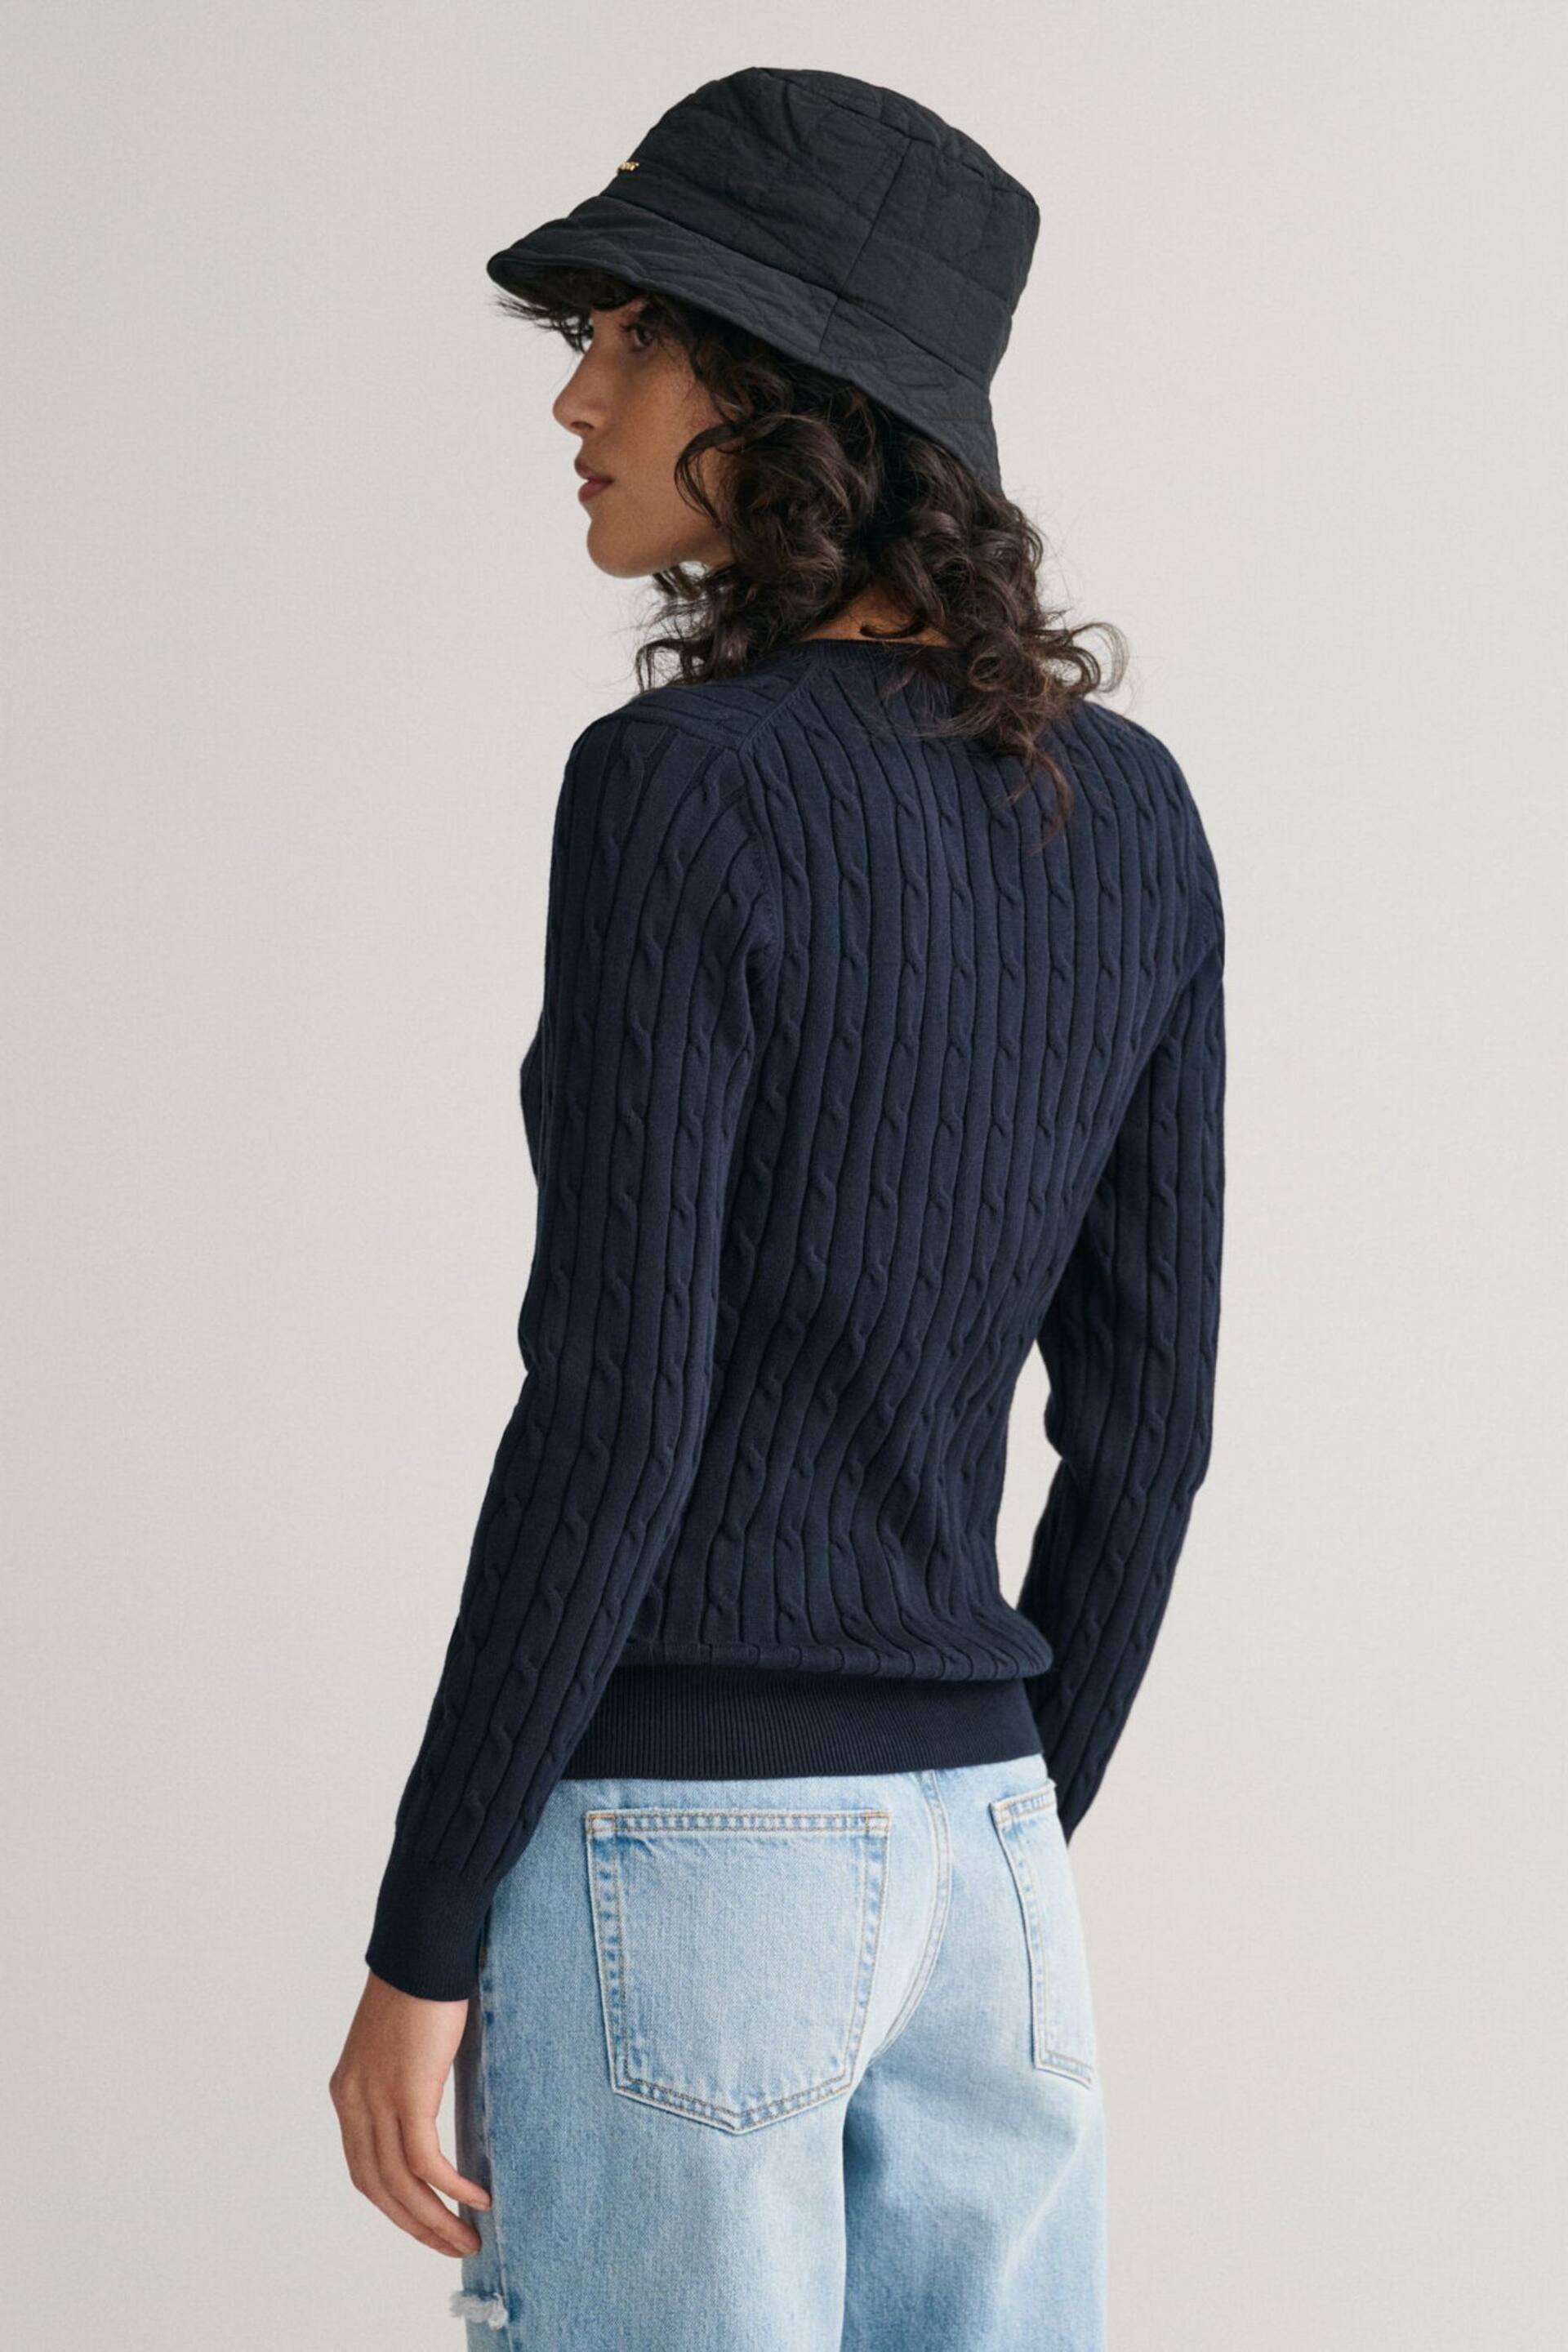 GANT Stretch Cotton Cable Knit Jumper - Image 3 of 6